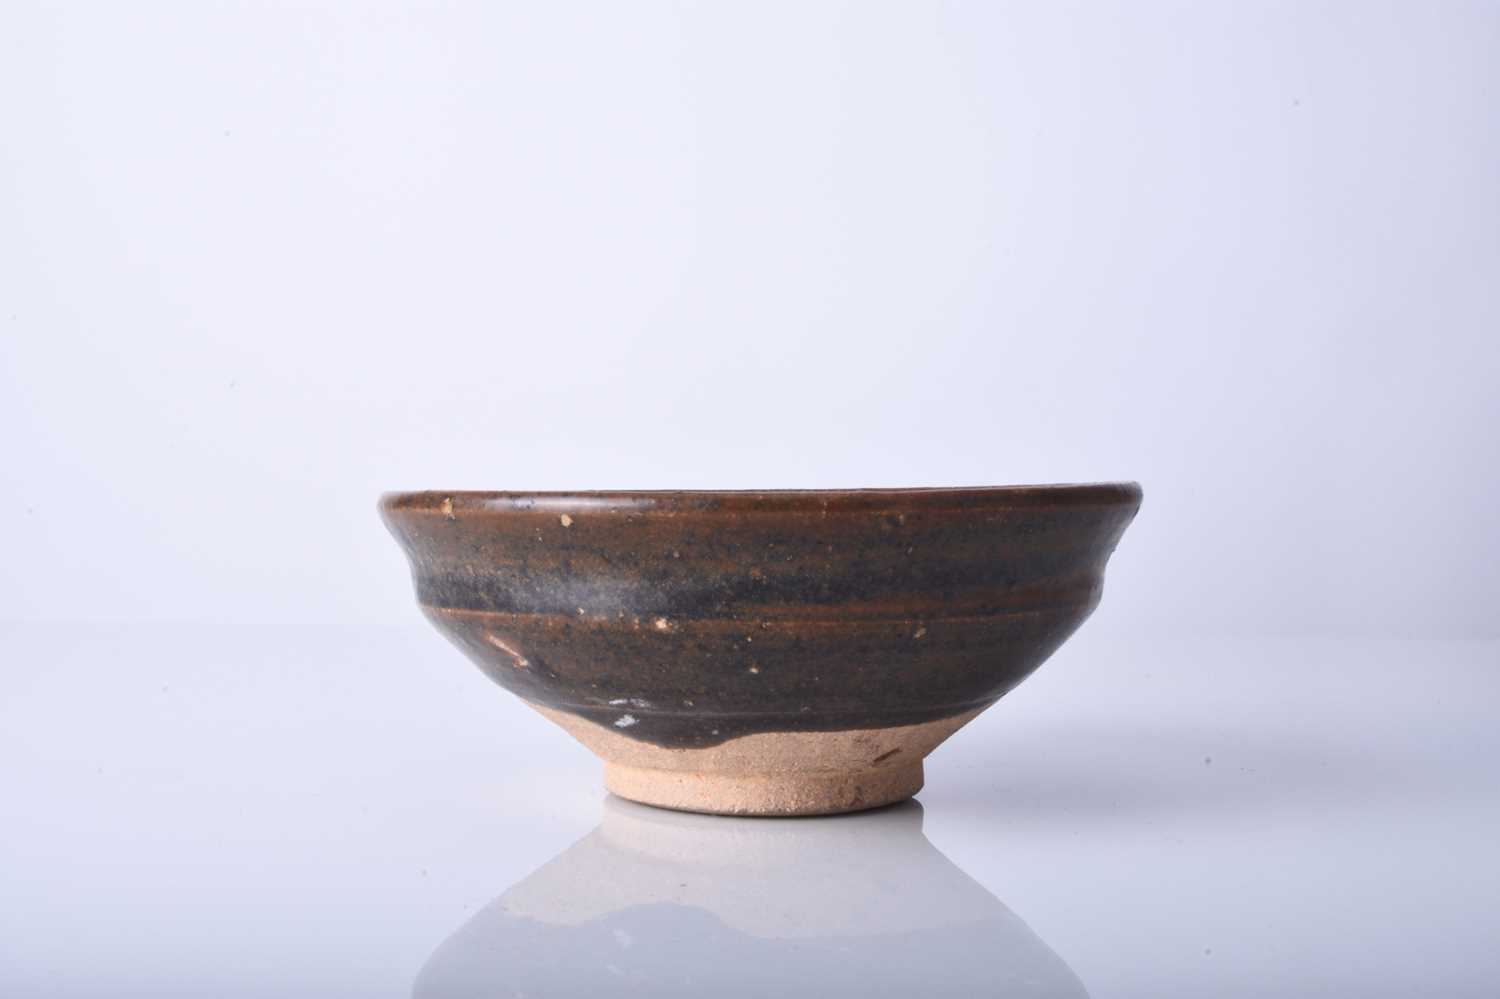 A Chinese Jian ware bowl, possibly Song Dynasty